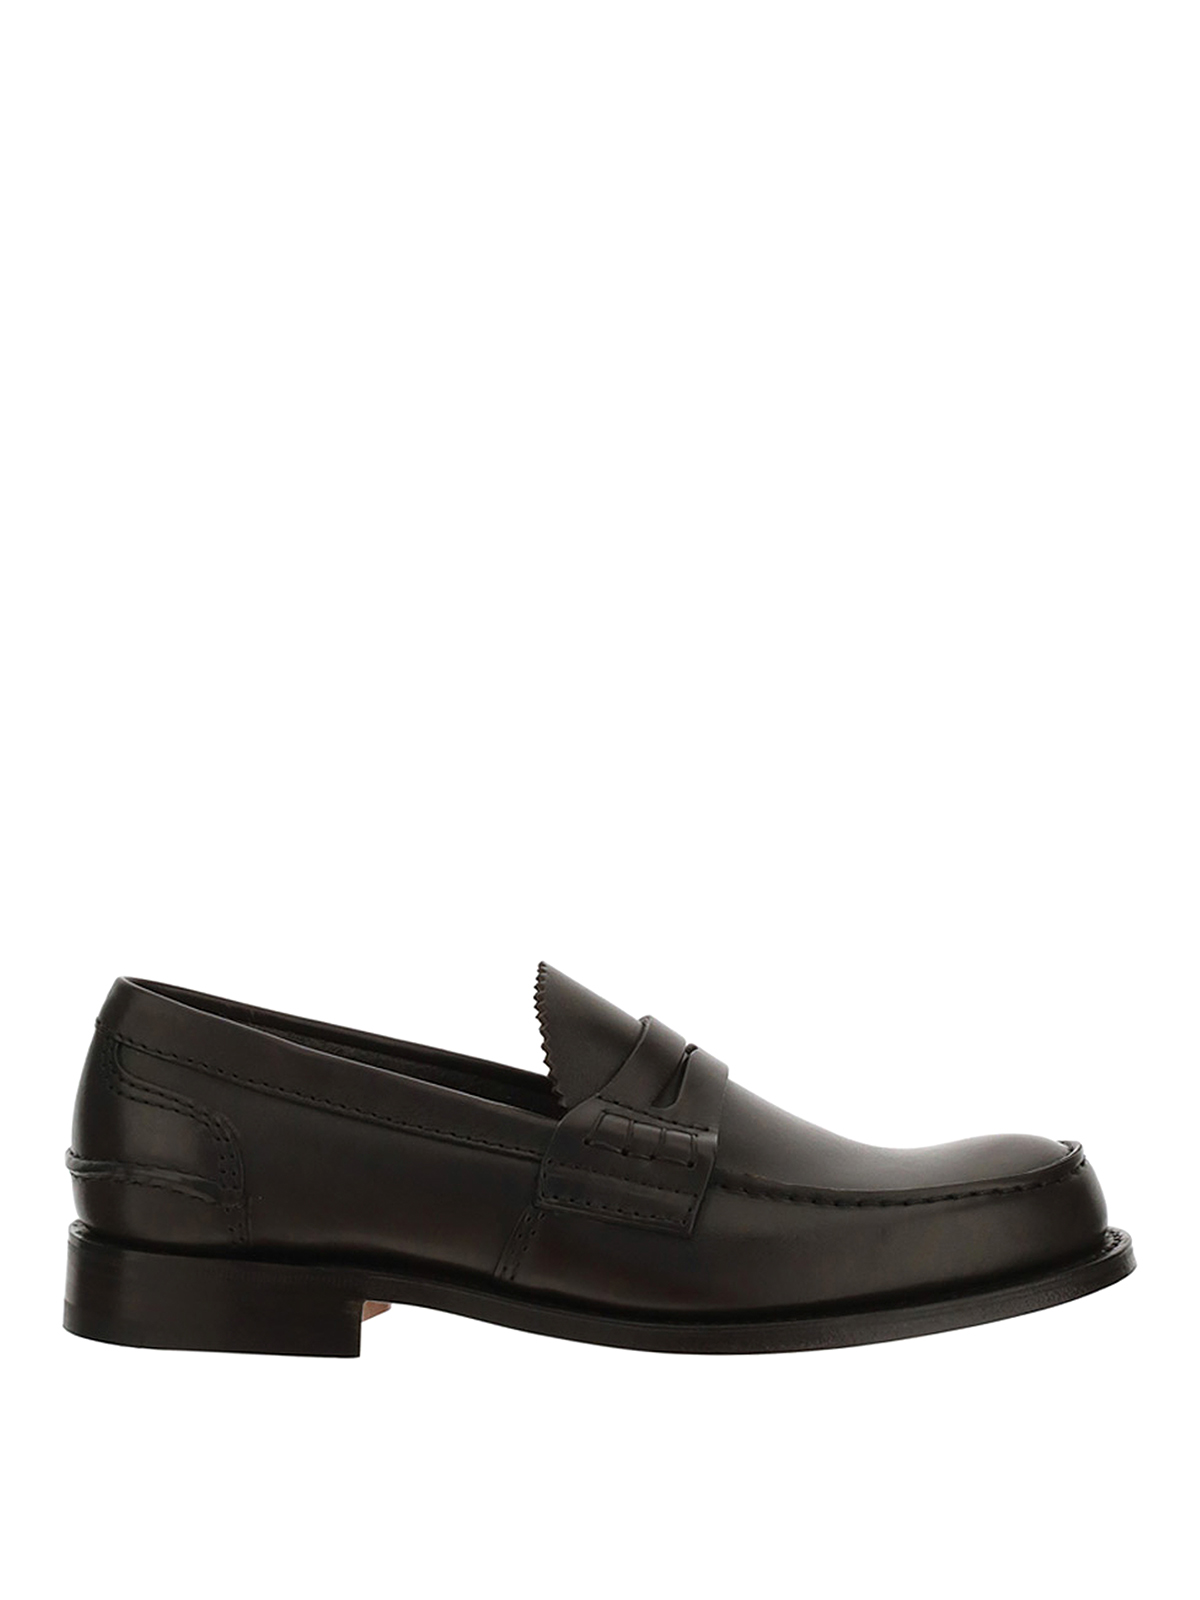 Loafers & Slippers Church's - Smooth leather penny loafers ...